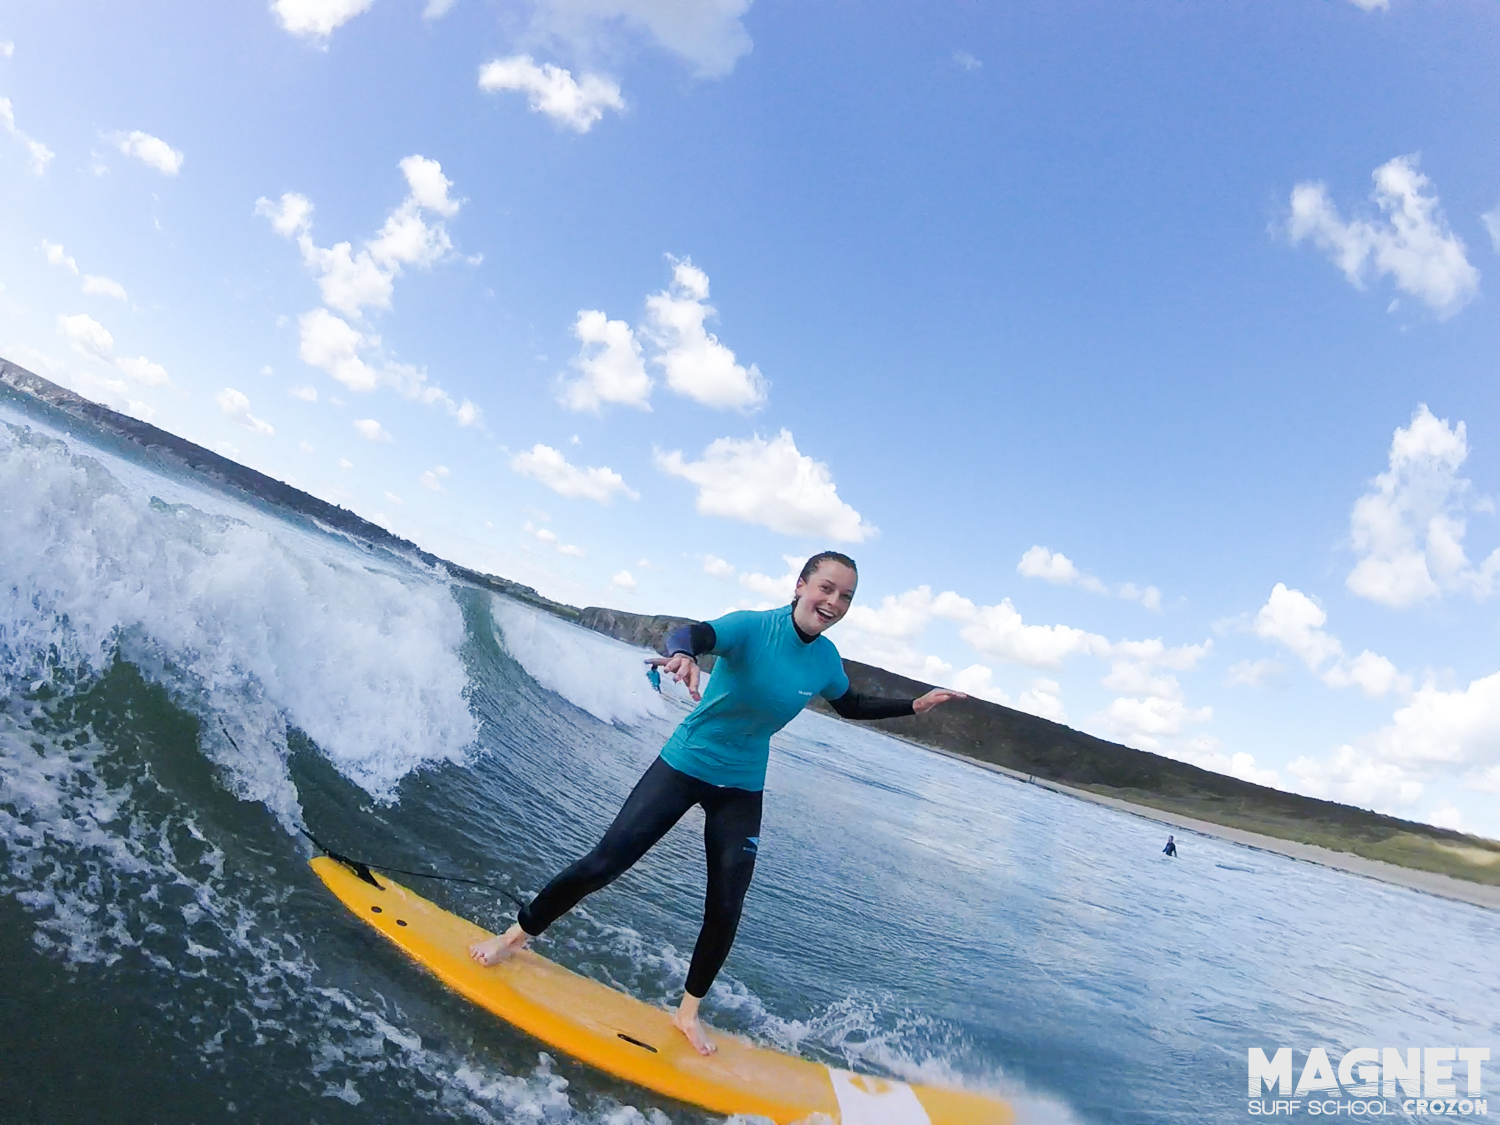 Enjoy the images and video analyzes at the Crozon surf school.